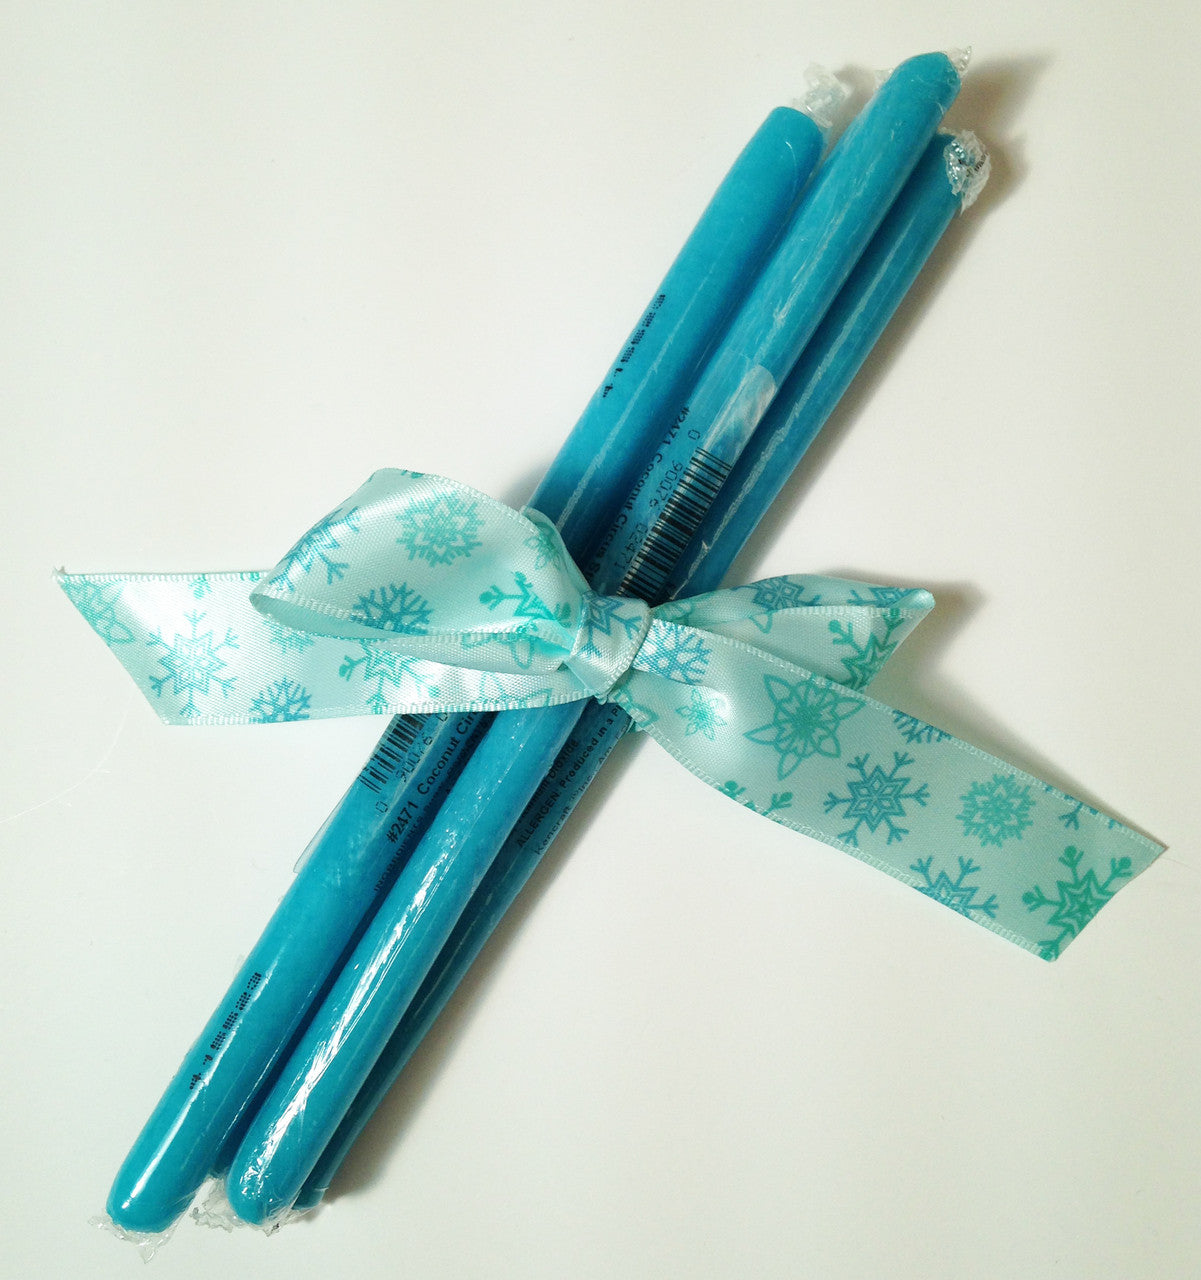 Tie a little bow on some candy sticks for a sweet little grab bag gift!